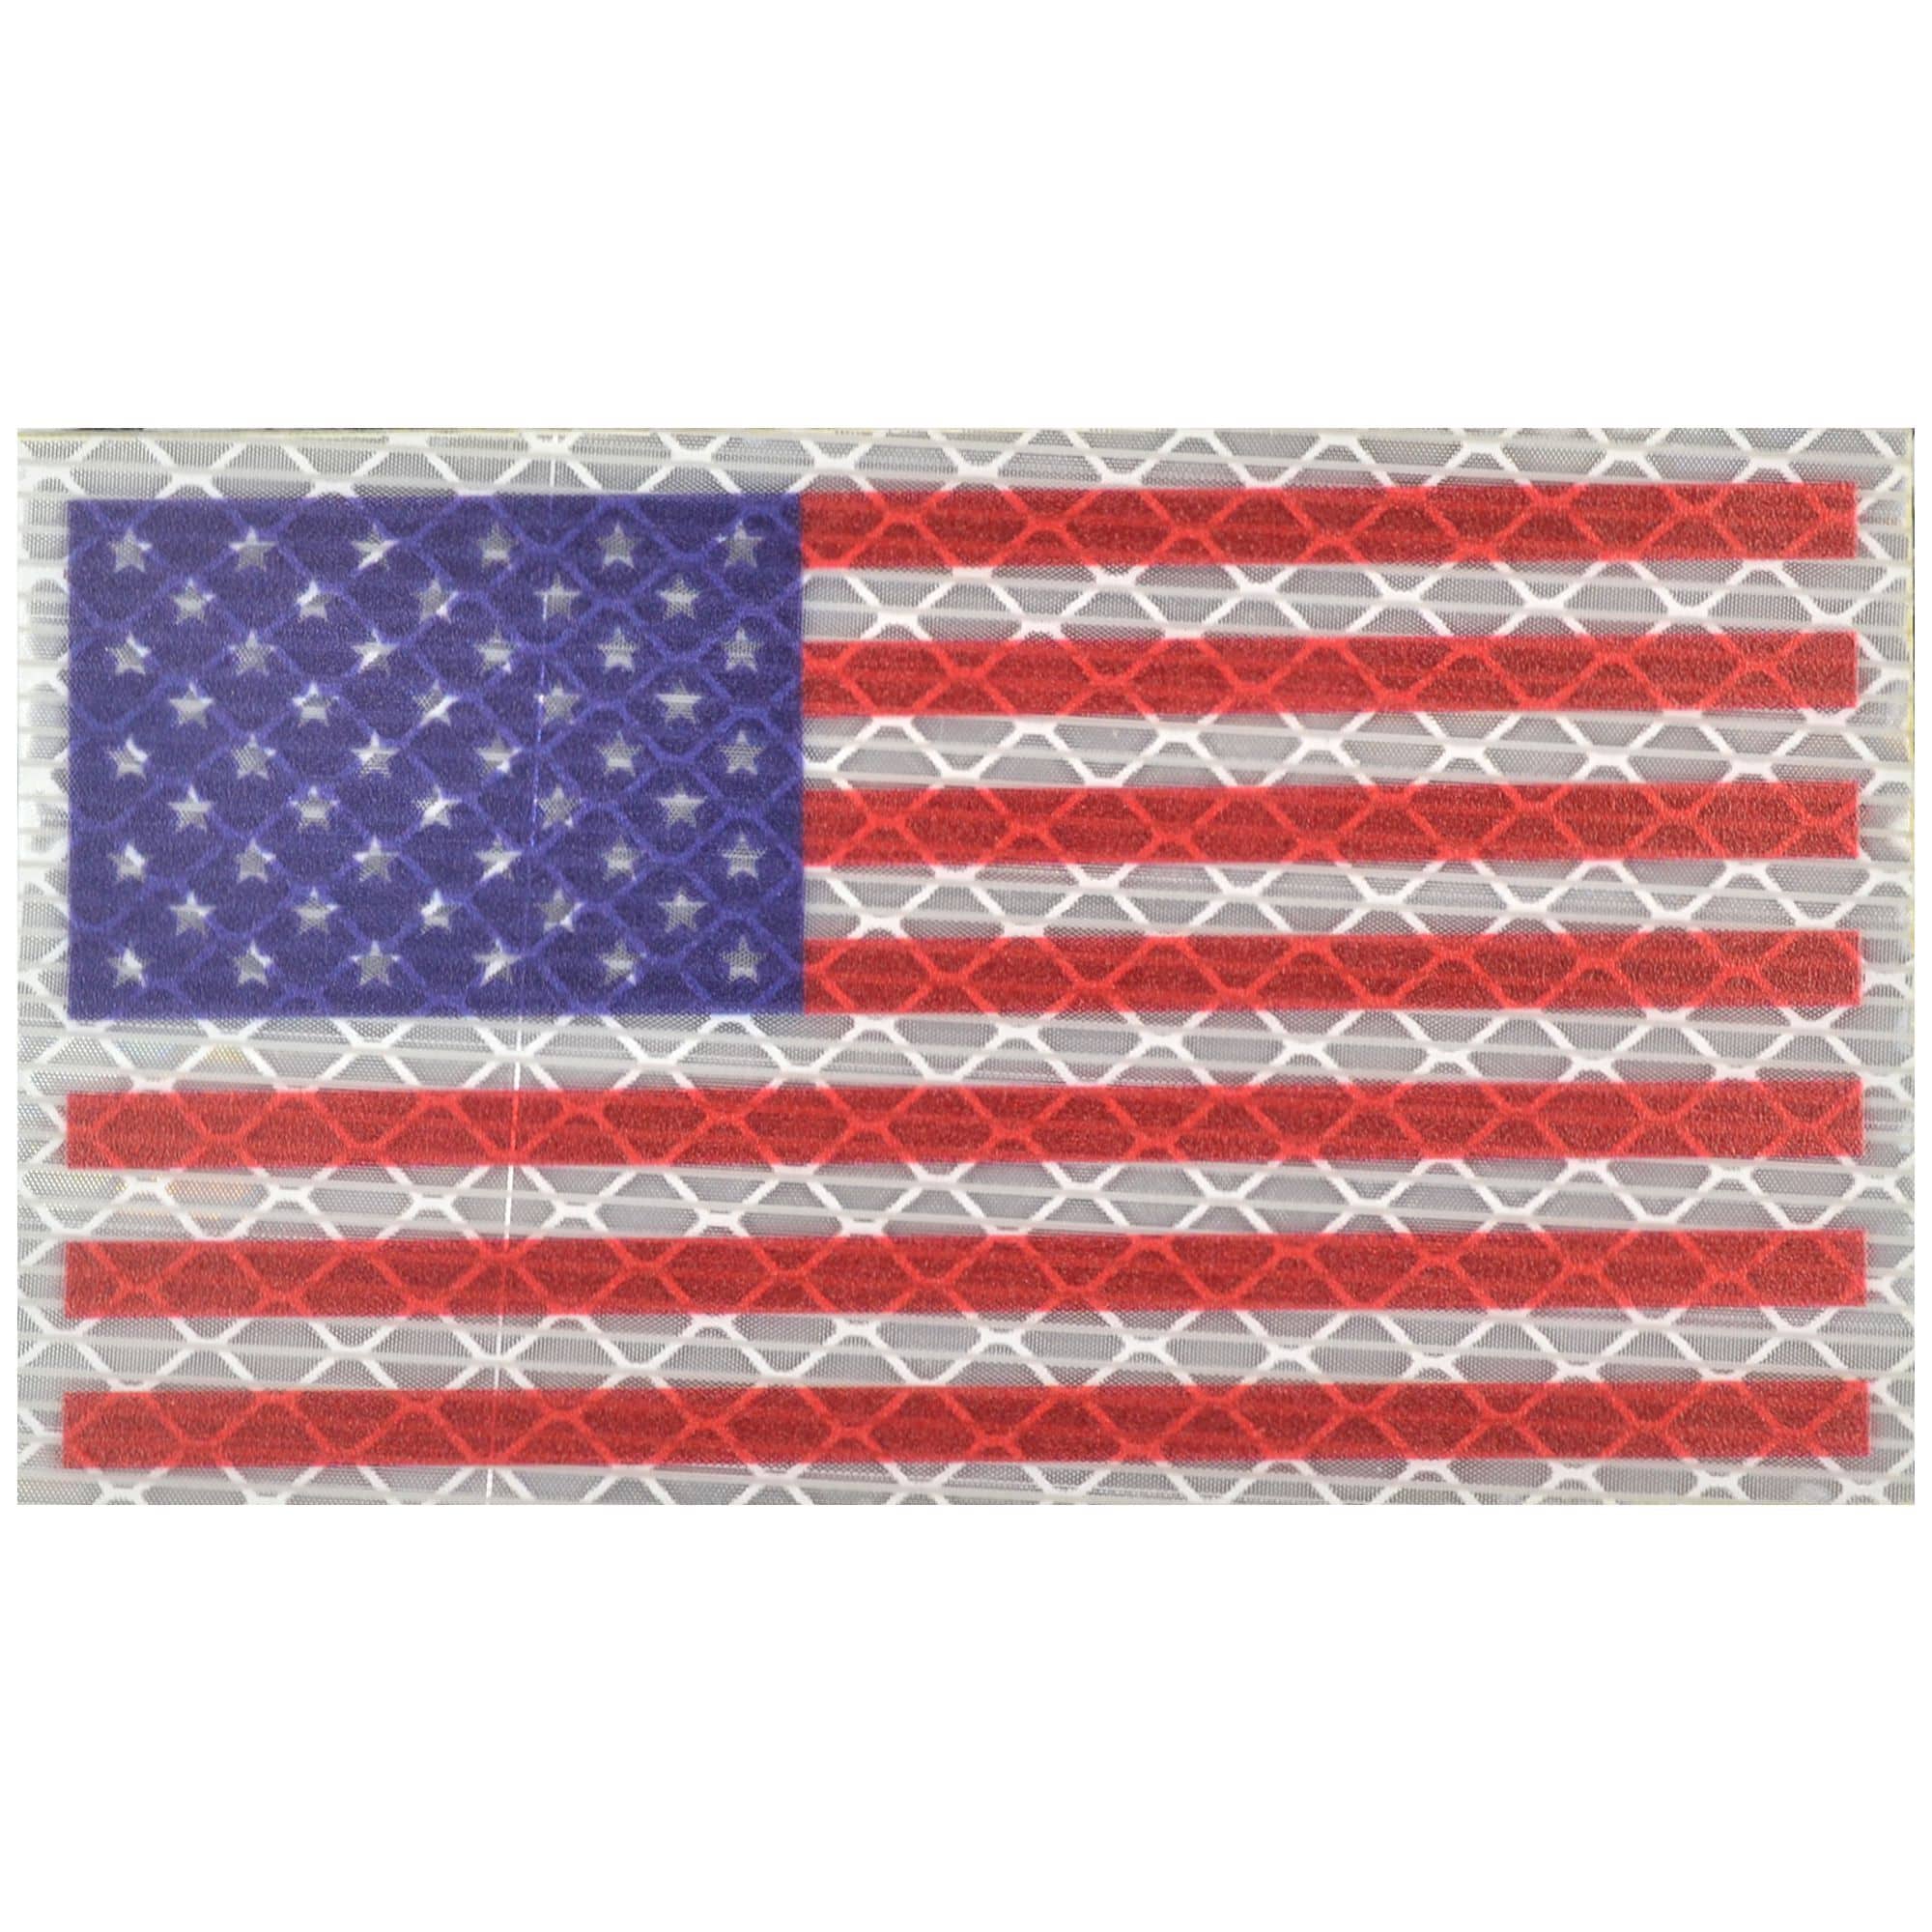 Tactical Gear Junkie Patches Forward Reflective Printed Full Color US Flag - 2x3.5 Patch